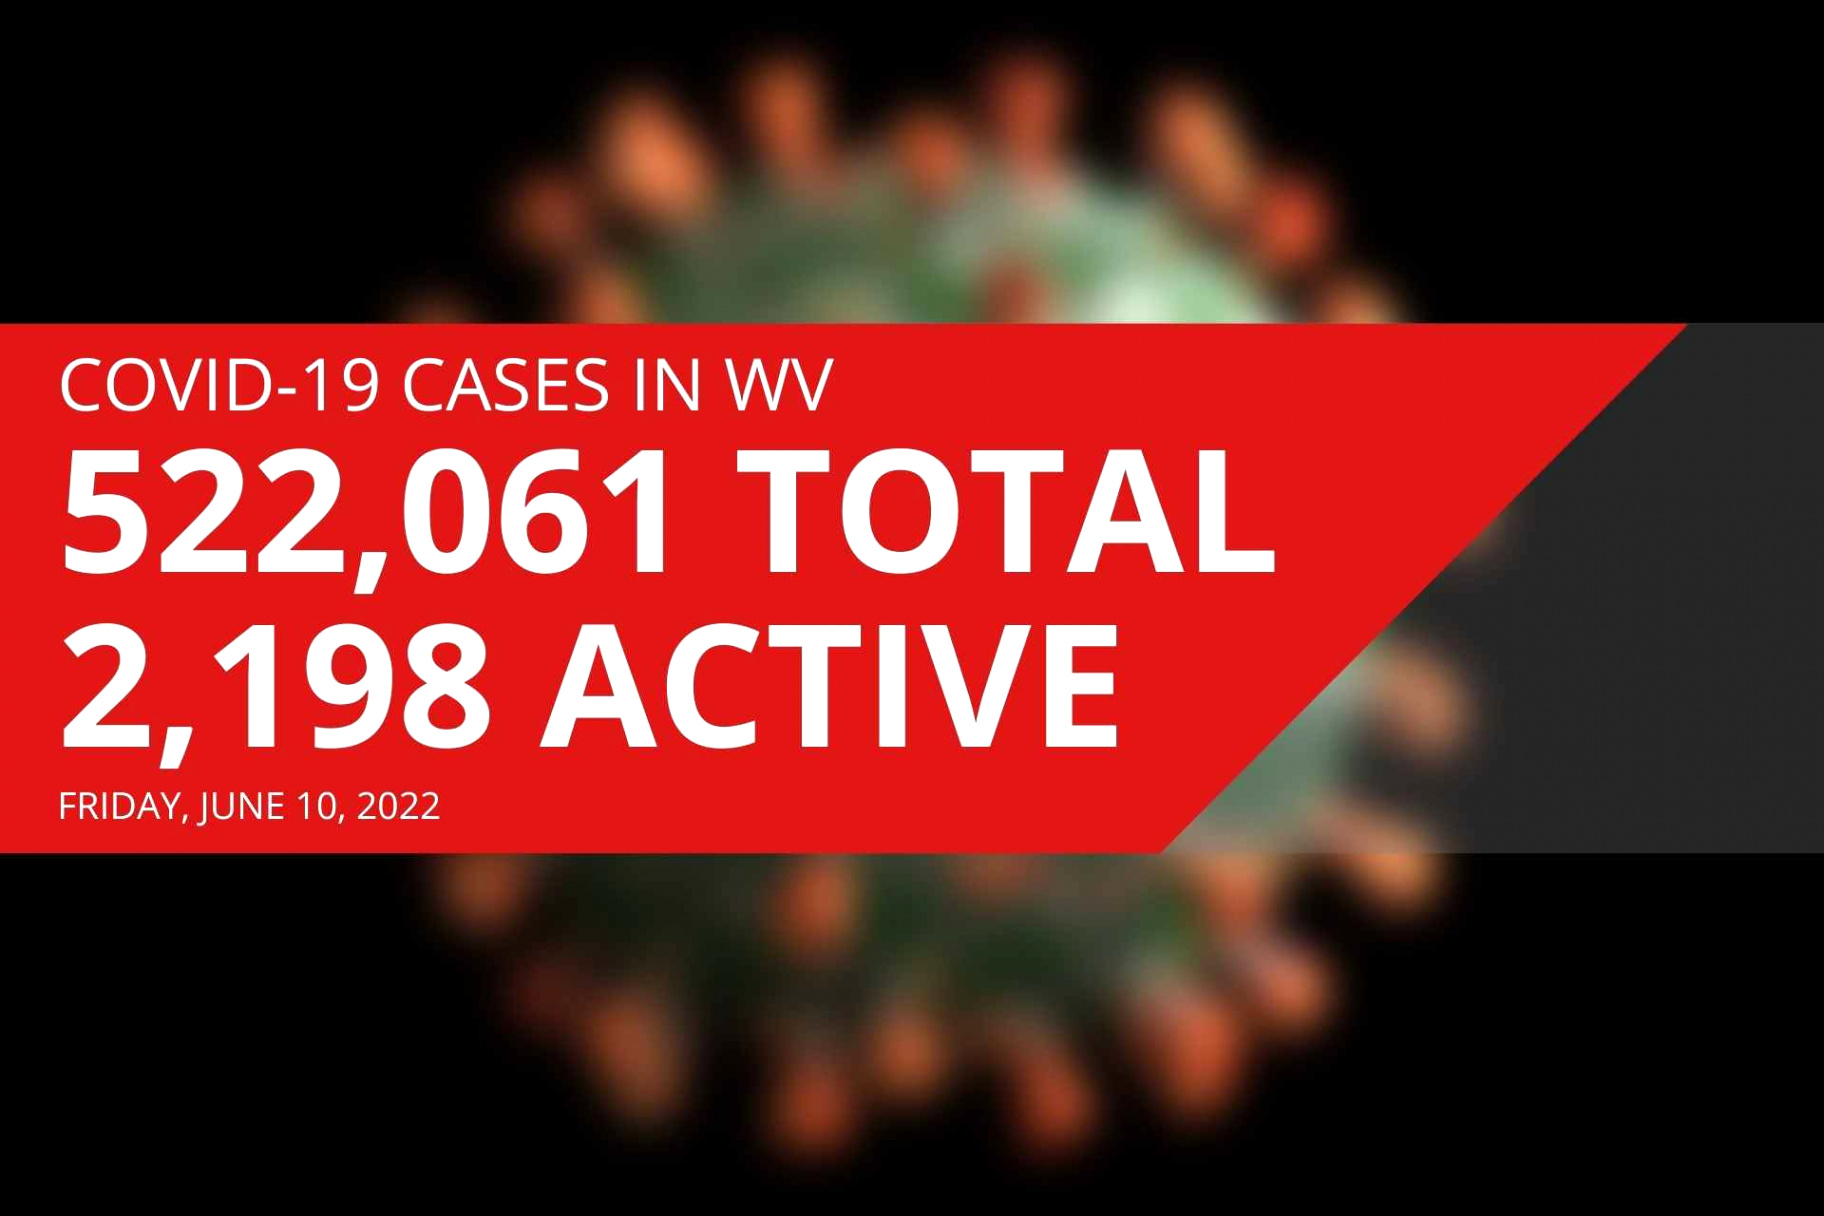 Personil Injury Lawyer In Wetzel Wv Dans West Virginia Reports 2,198 Active Covid Cases On Friday